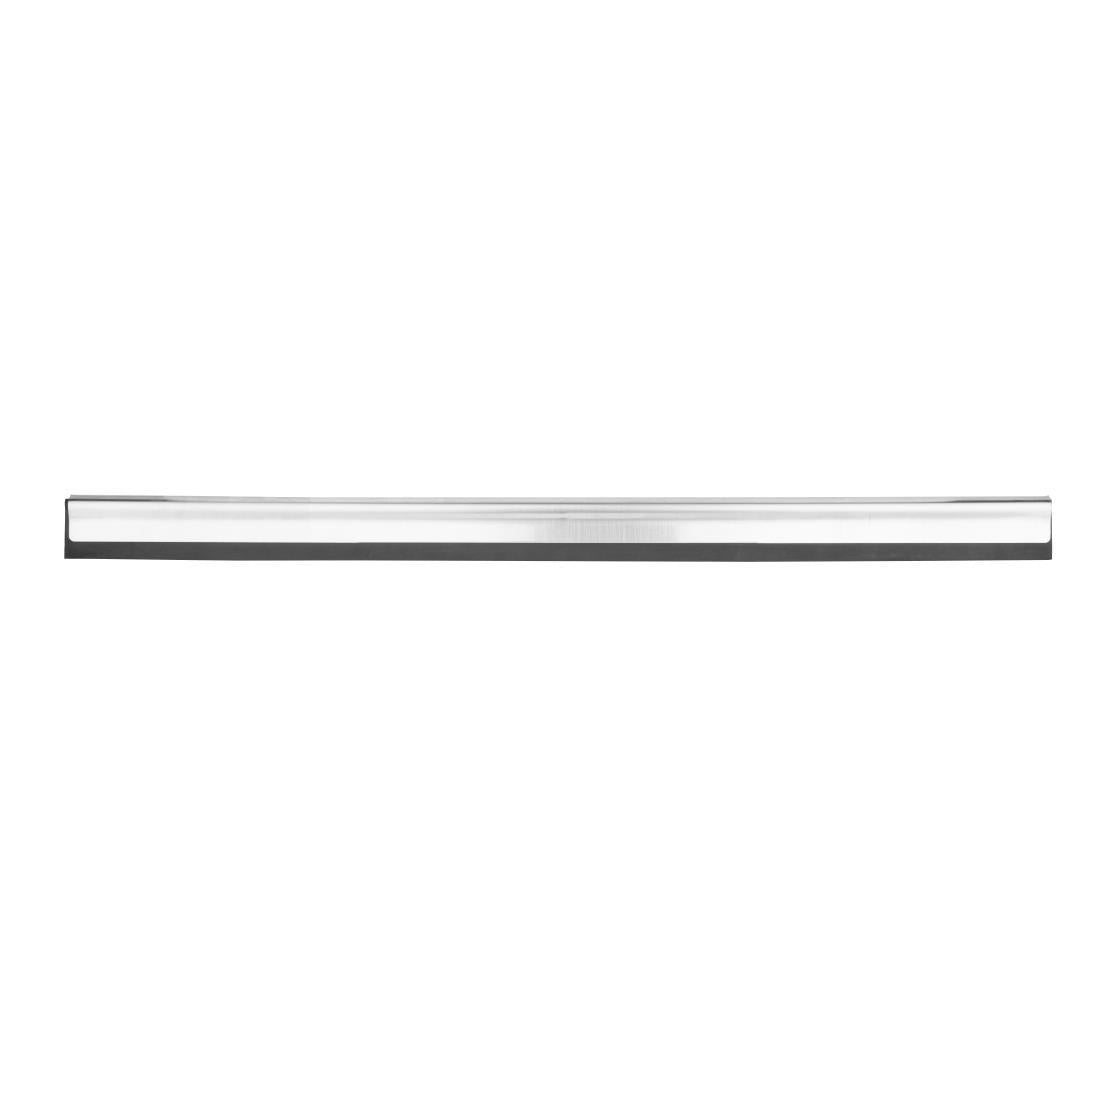 Jantex Stainless Steel Window Wiper 14in JD Catering Equipment Solutions Ltd